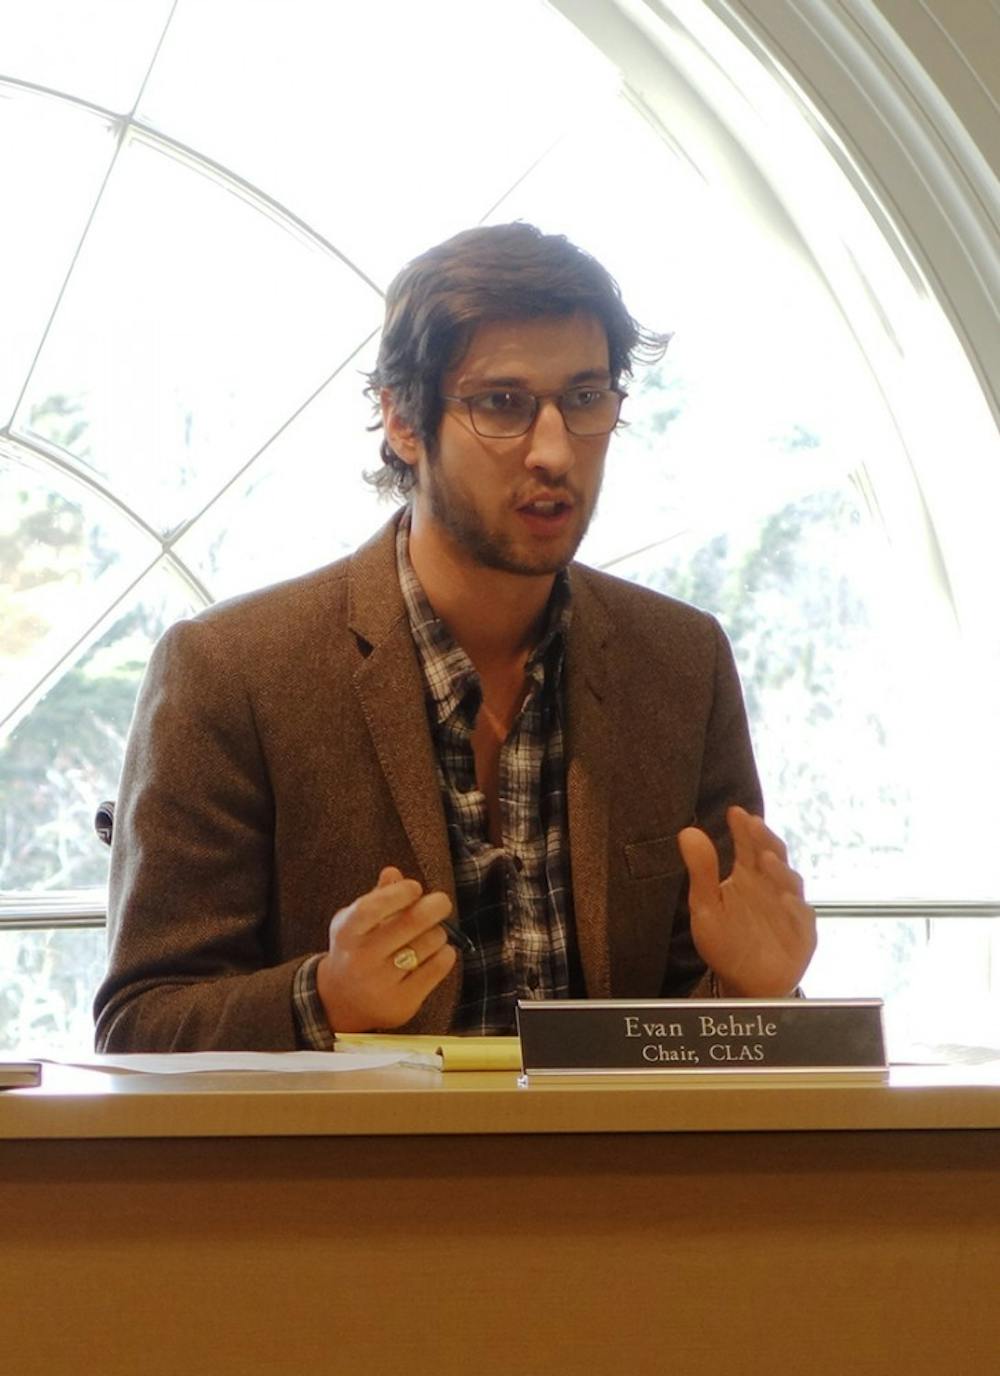 	Honor Committee Chair Evan Behrle, a fourth-year College student, said putting the question of proctored exams on a survey rather than a ballot in the University Board of Elections process, as previously proposed, will allow for a more comprehensive gauge of student opinion.